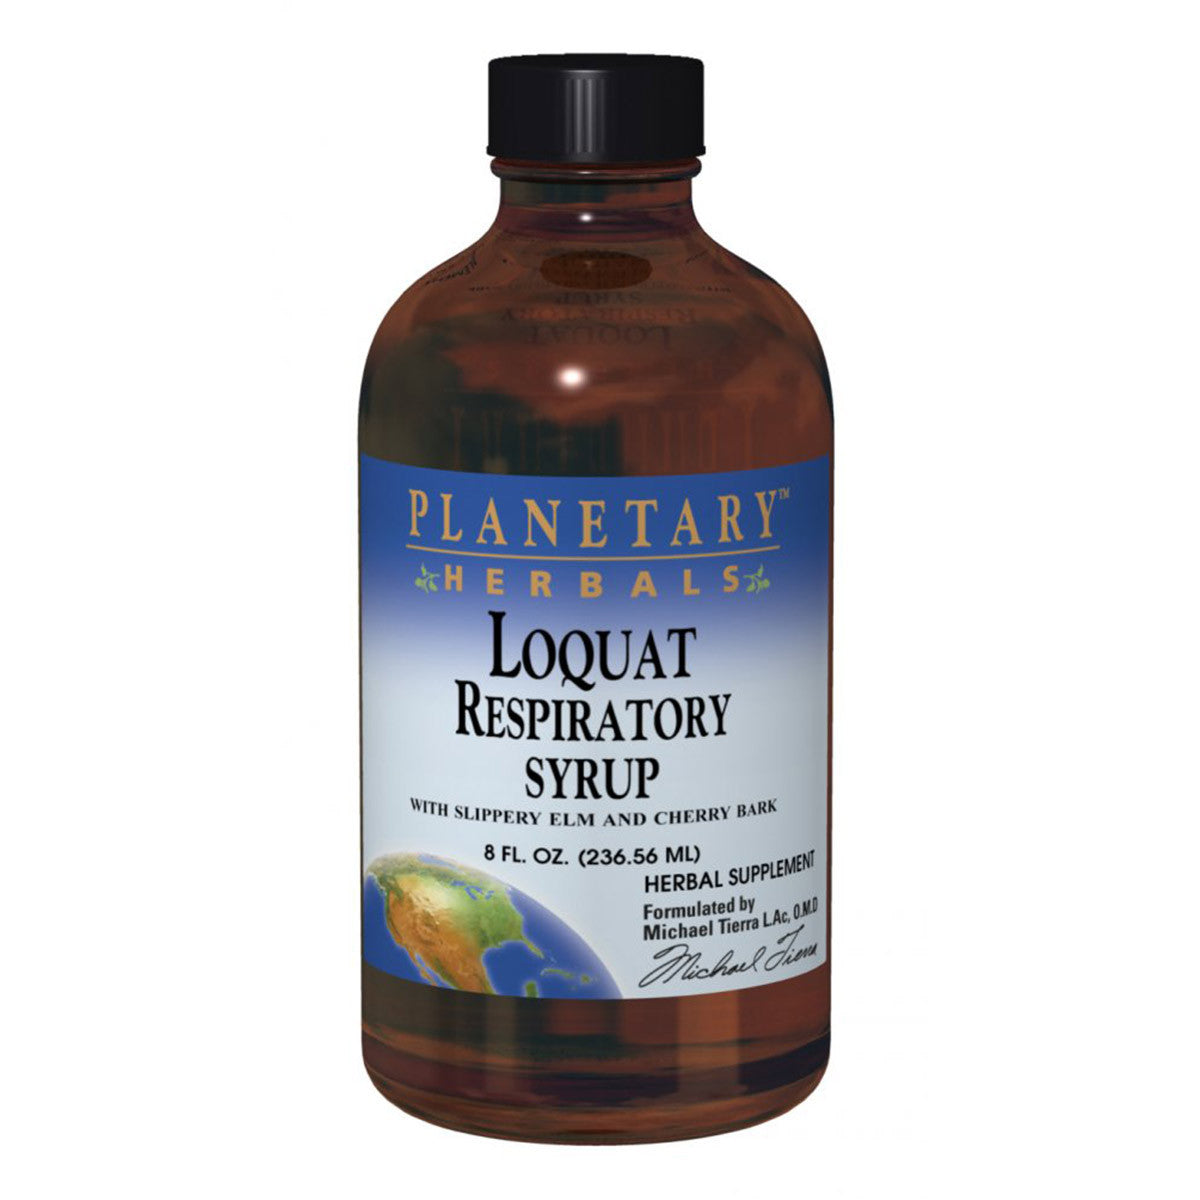 Primary image of Loquat Respiratory Syrup